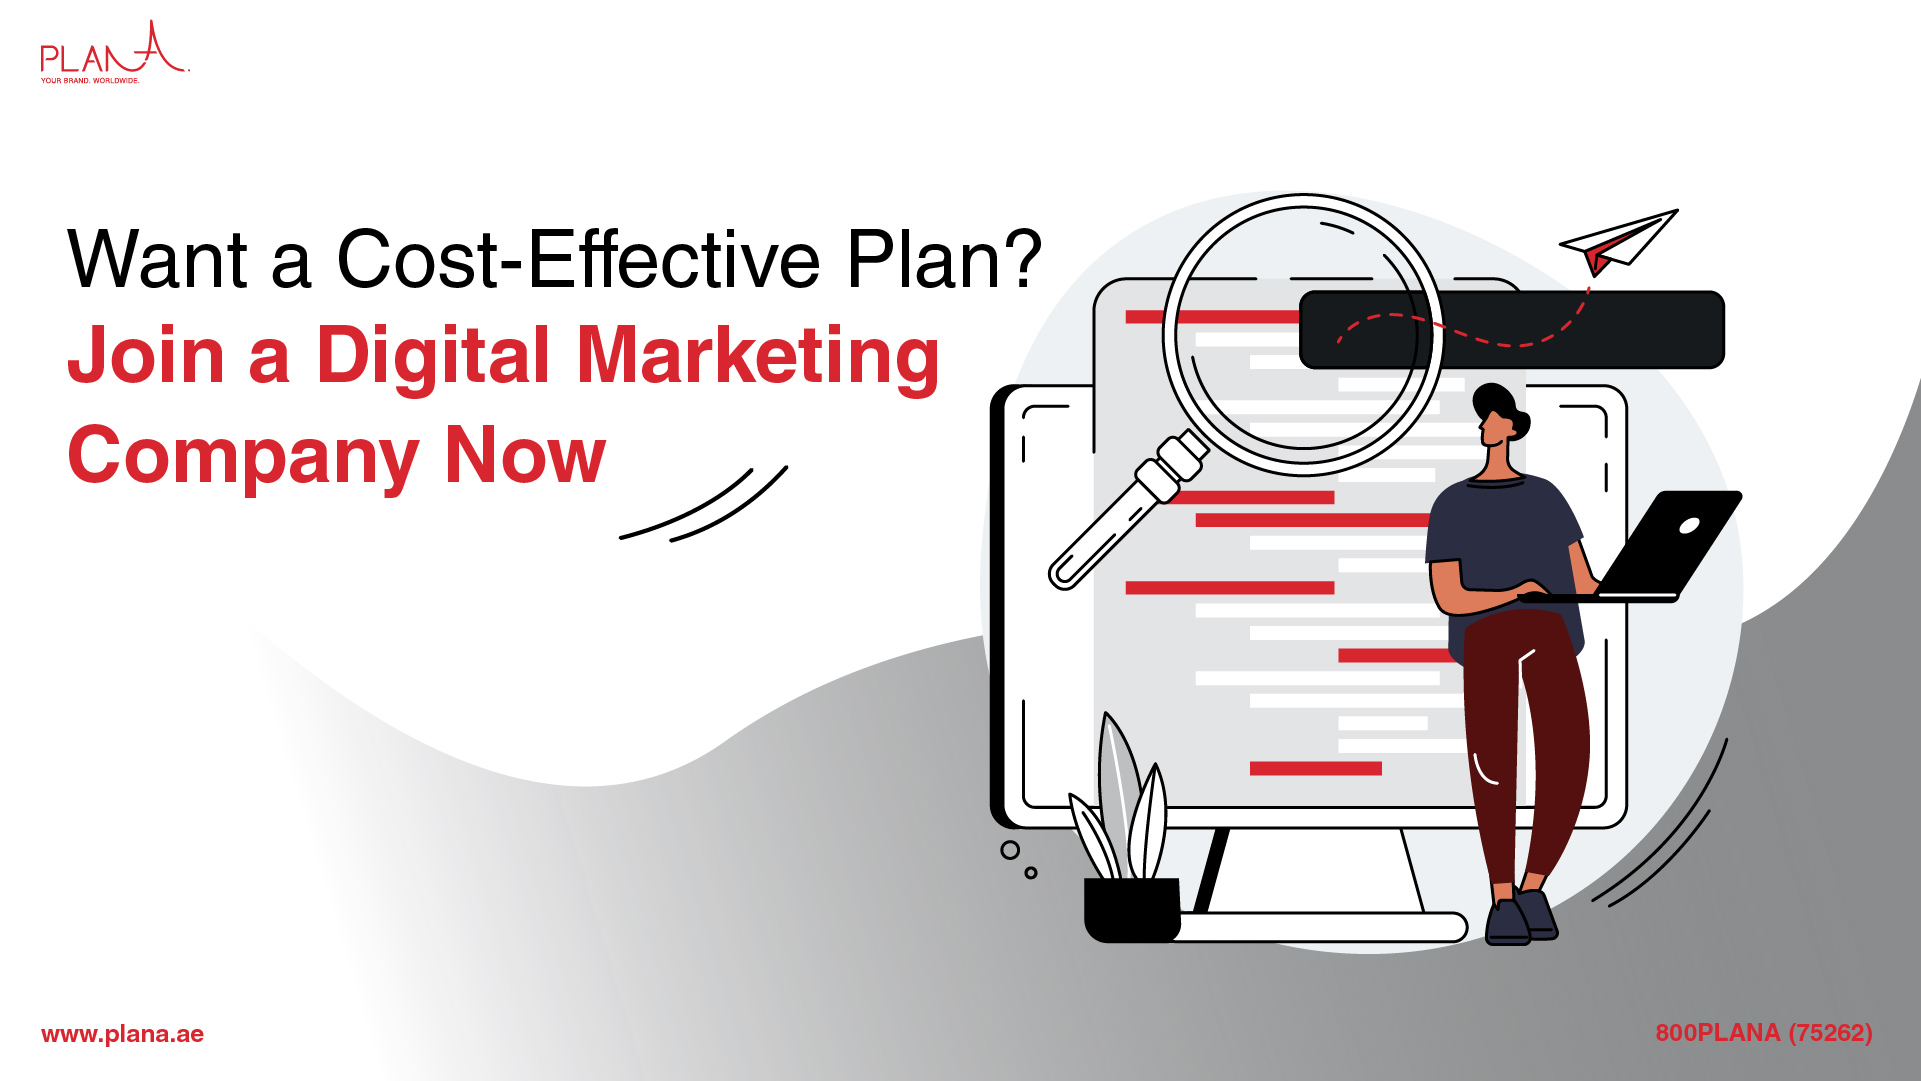 Want a Cost-Effective Plan? Join a Digital Marketing Company Now!